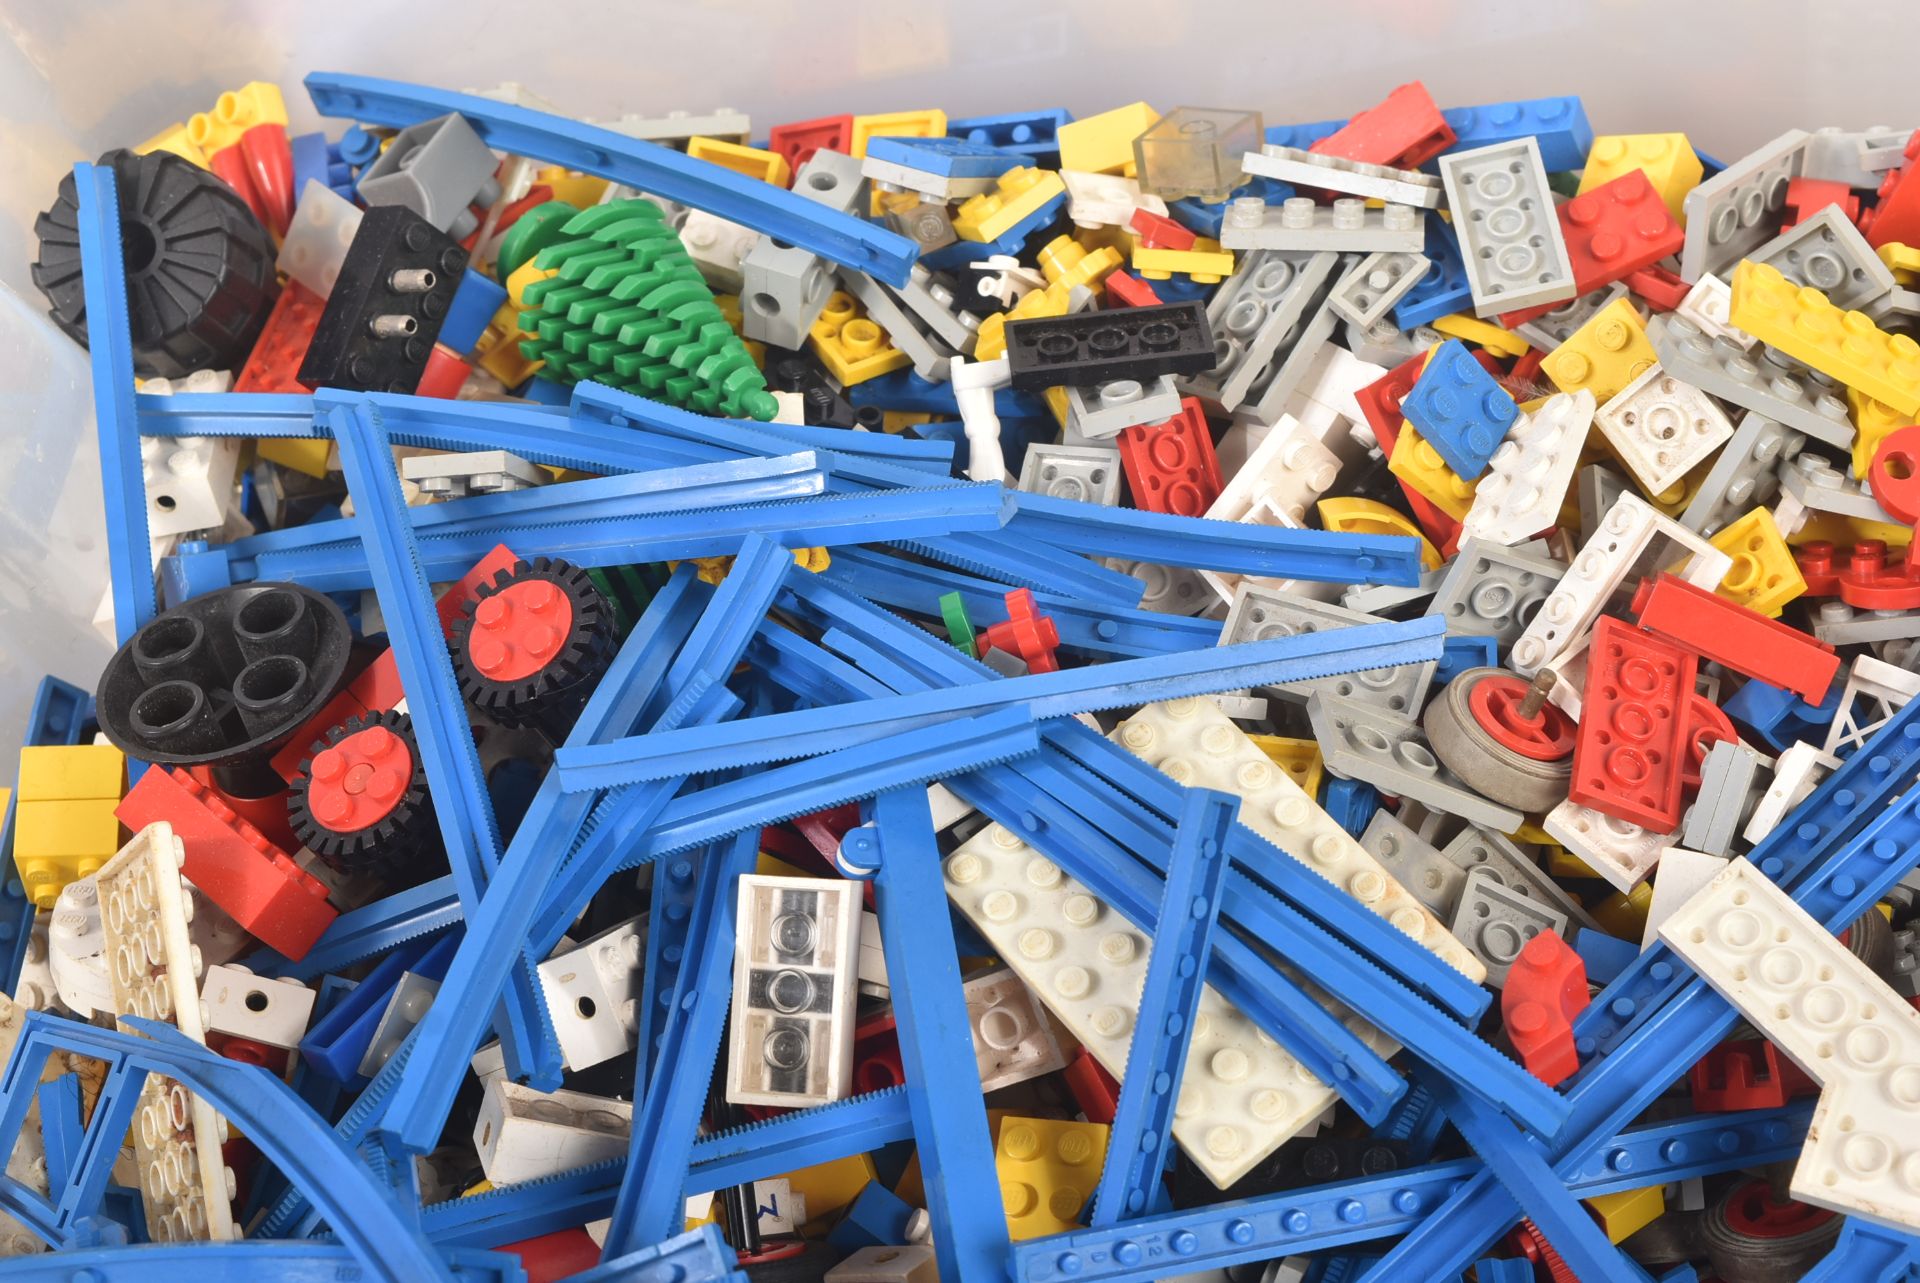 LARGE COLLECTION OF VINTAGE LOOSE LEGO BRICKS - Image 3 of 6